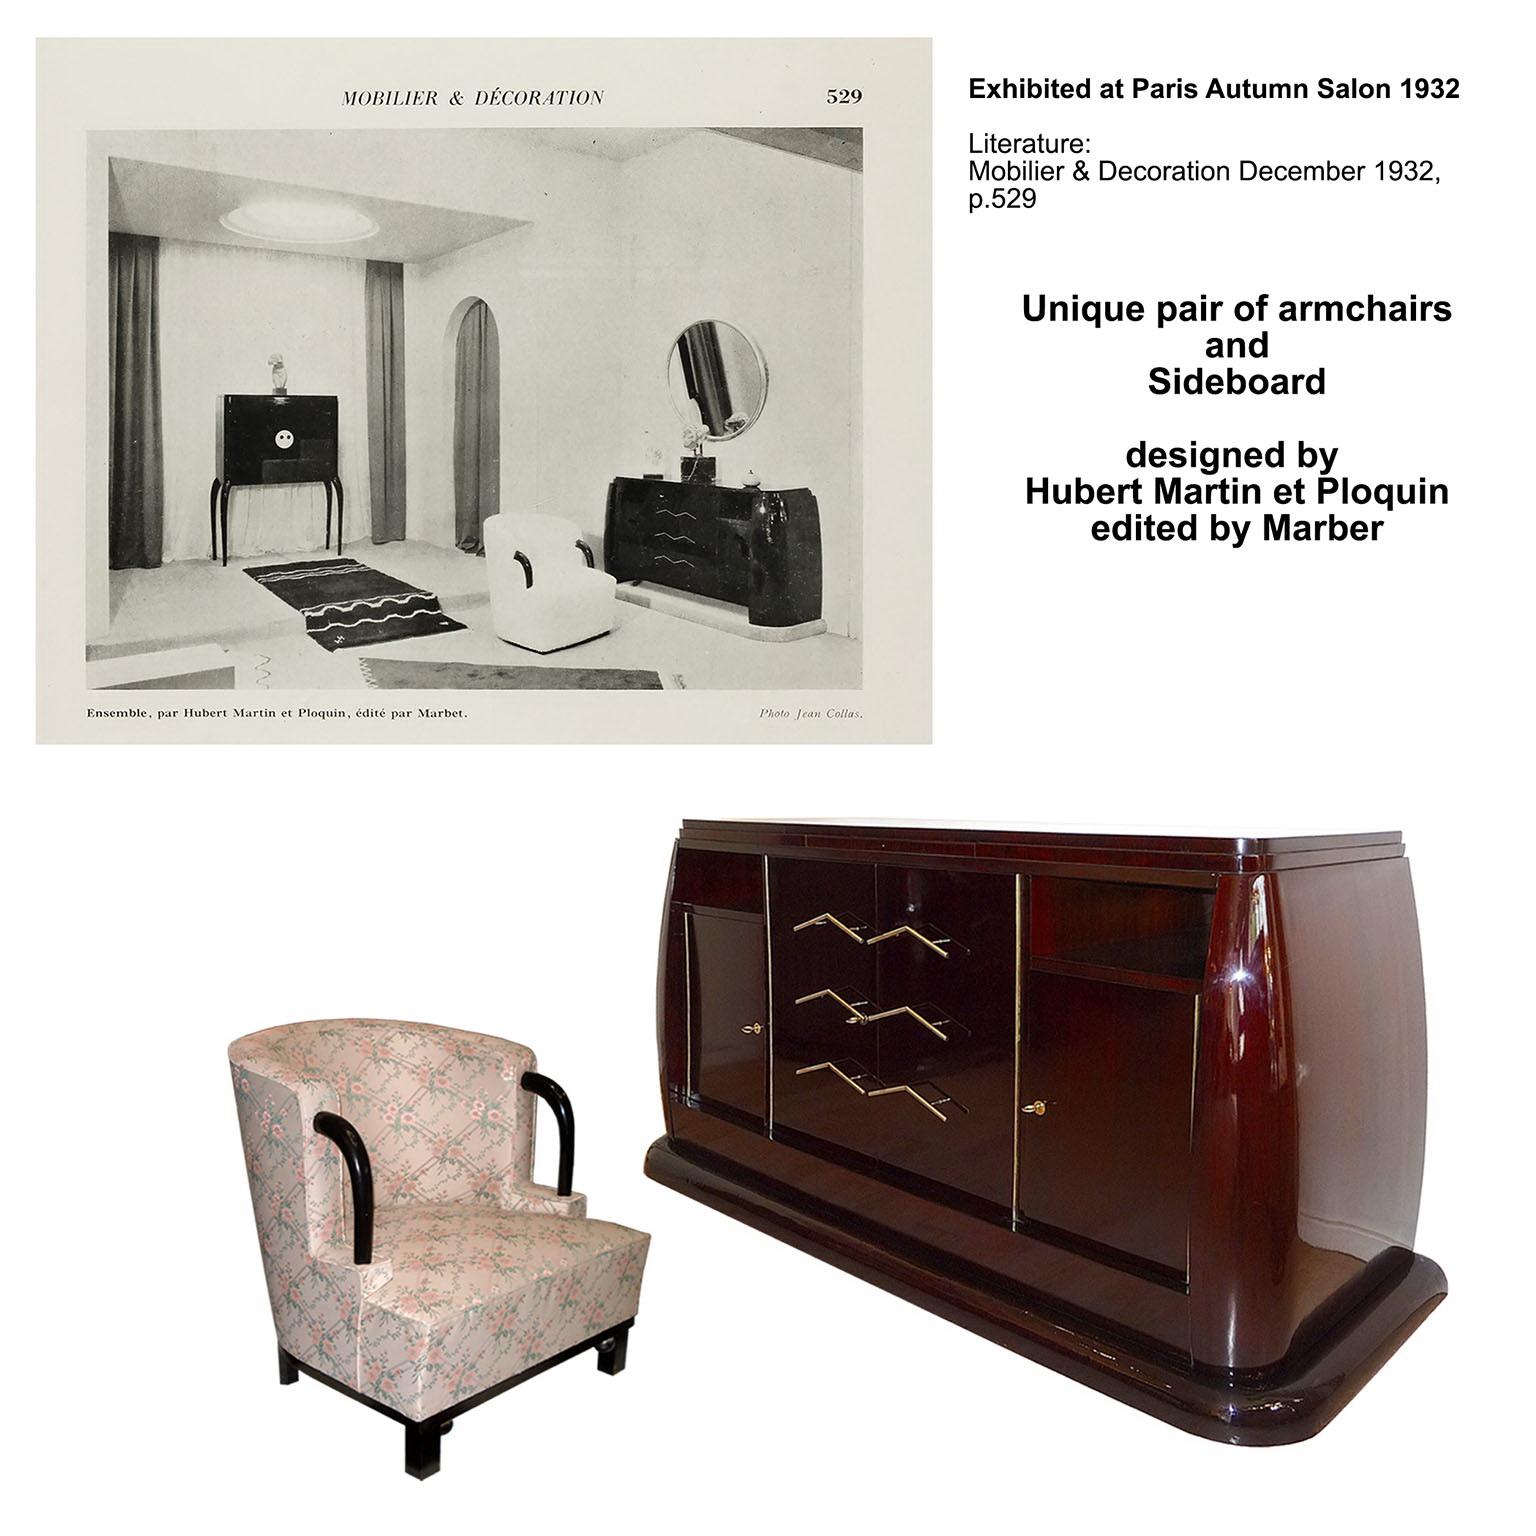 An exquisite sideboard by Hubert Martin et Ploquin, part of a complete dining room. Made of solid, very heavy wood, veneered in mahogany, beautiful unusual rounded shape. 
Identical model exhibited at Paris Autumn Salon 1932. Complete dining room